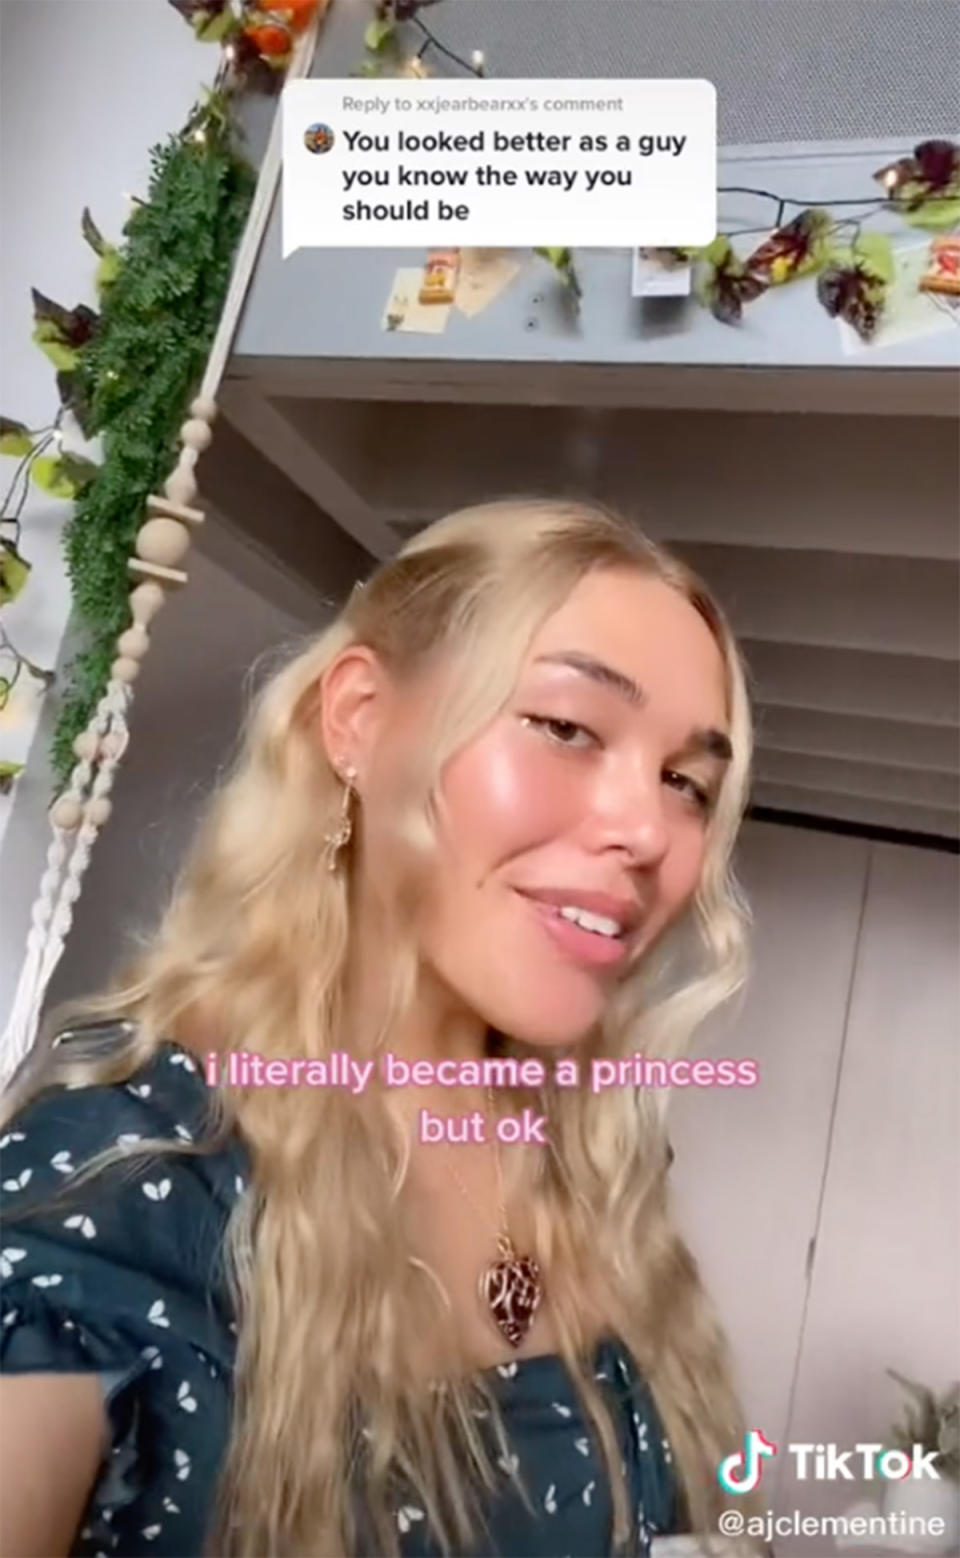 TikTok star AJ Clementine in a video responding to a follower's comment that she 